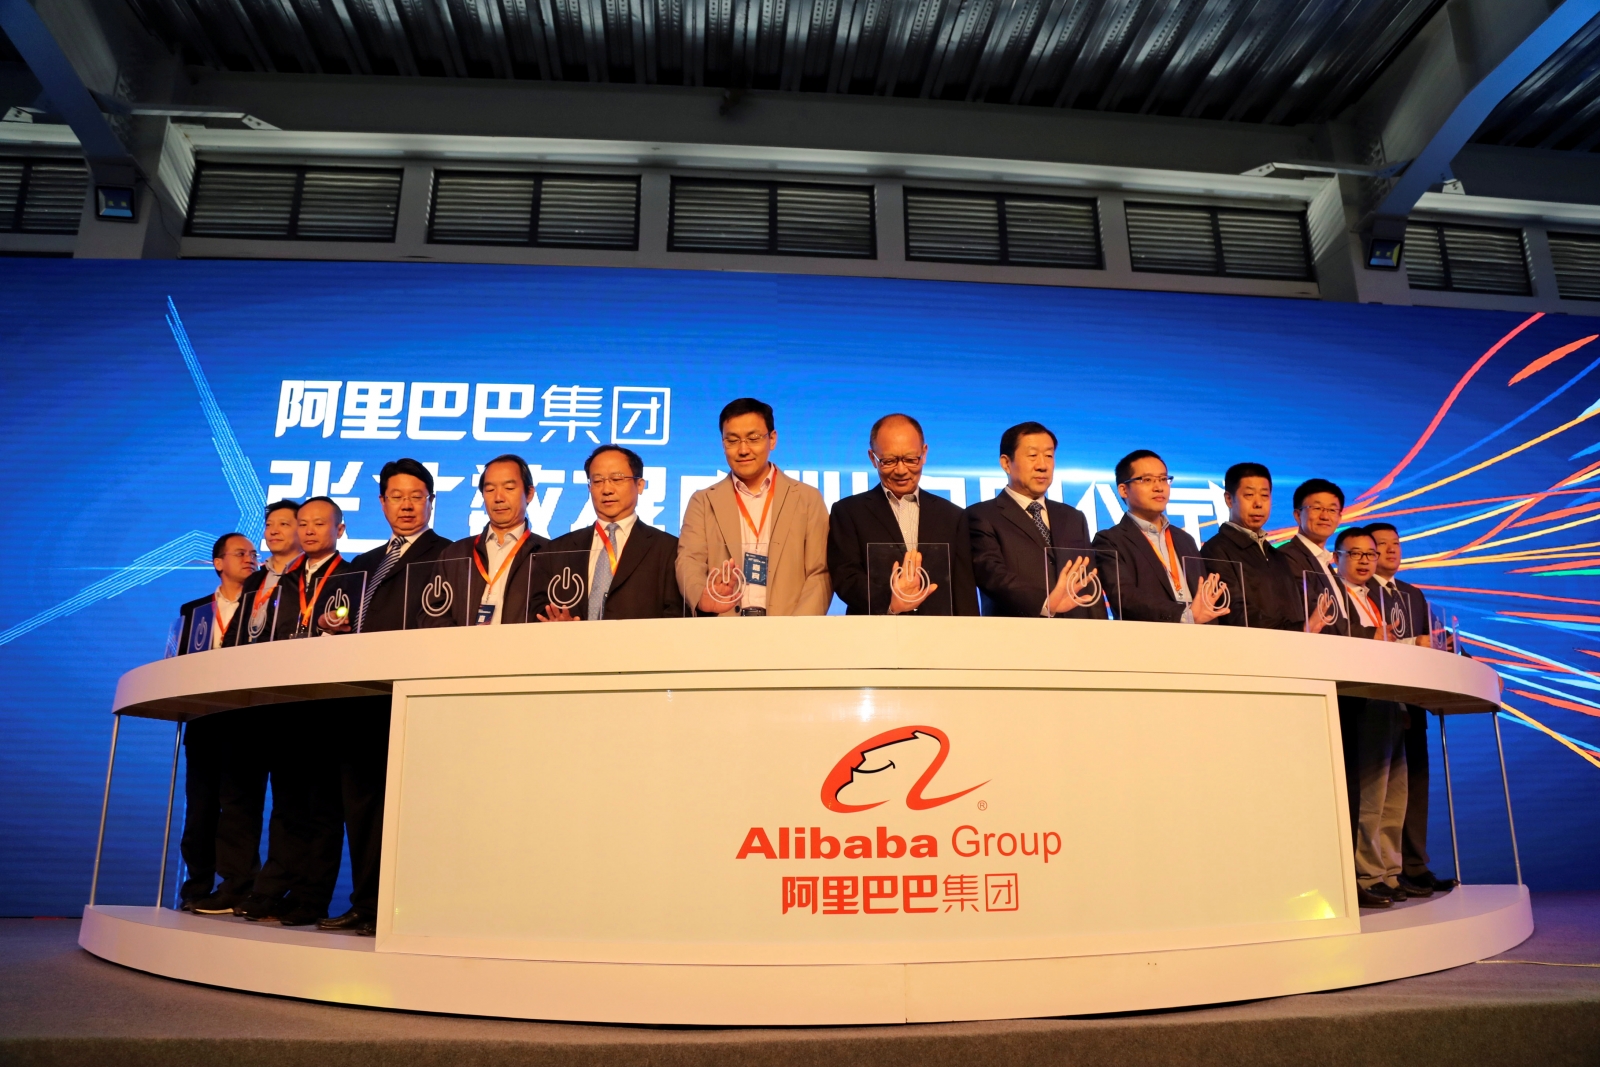 Alibaba's subtle ecommrcece strategy to seed the world with Alipay1600 x 1067